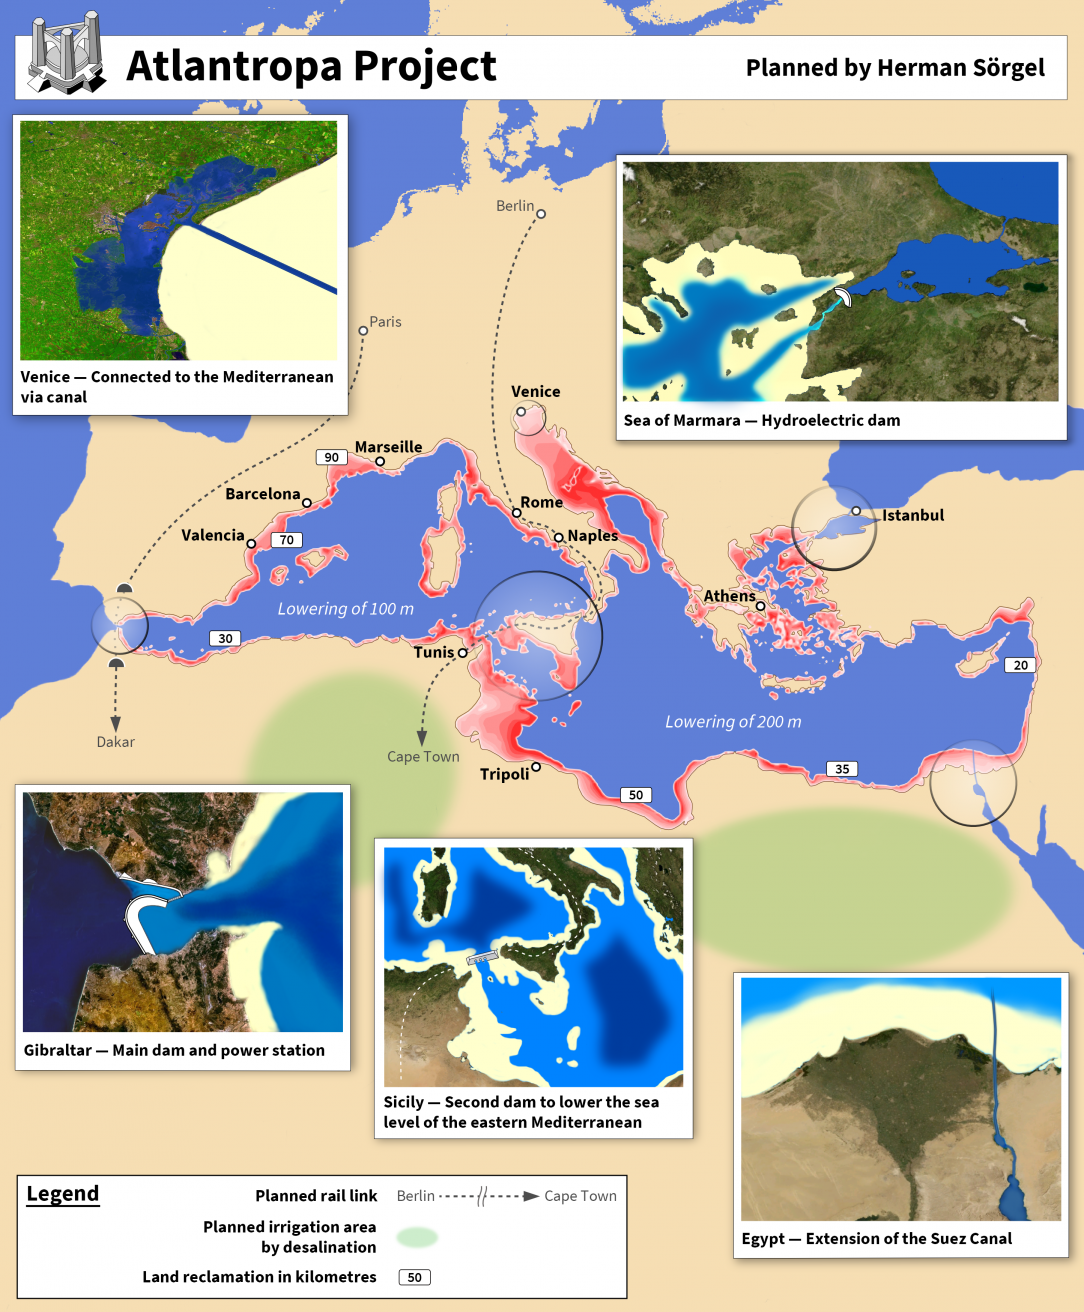 This is what the Mediterranean would look like if the Atlantropa Project had been made